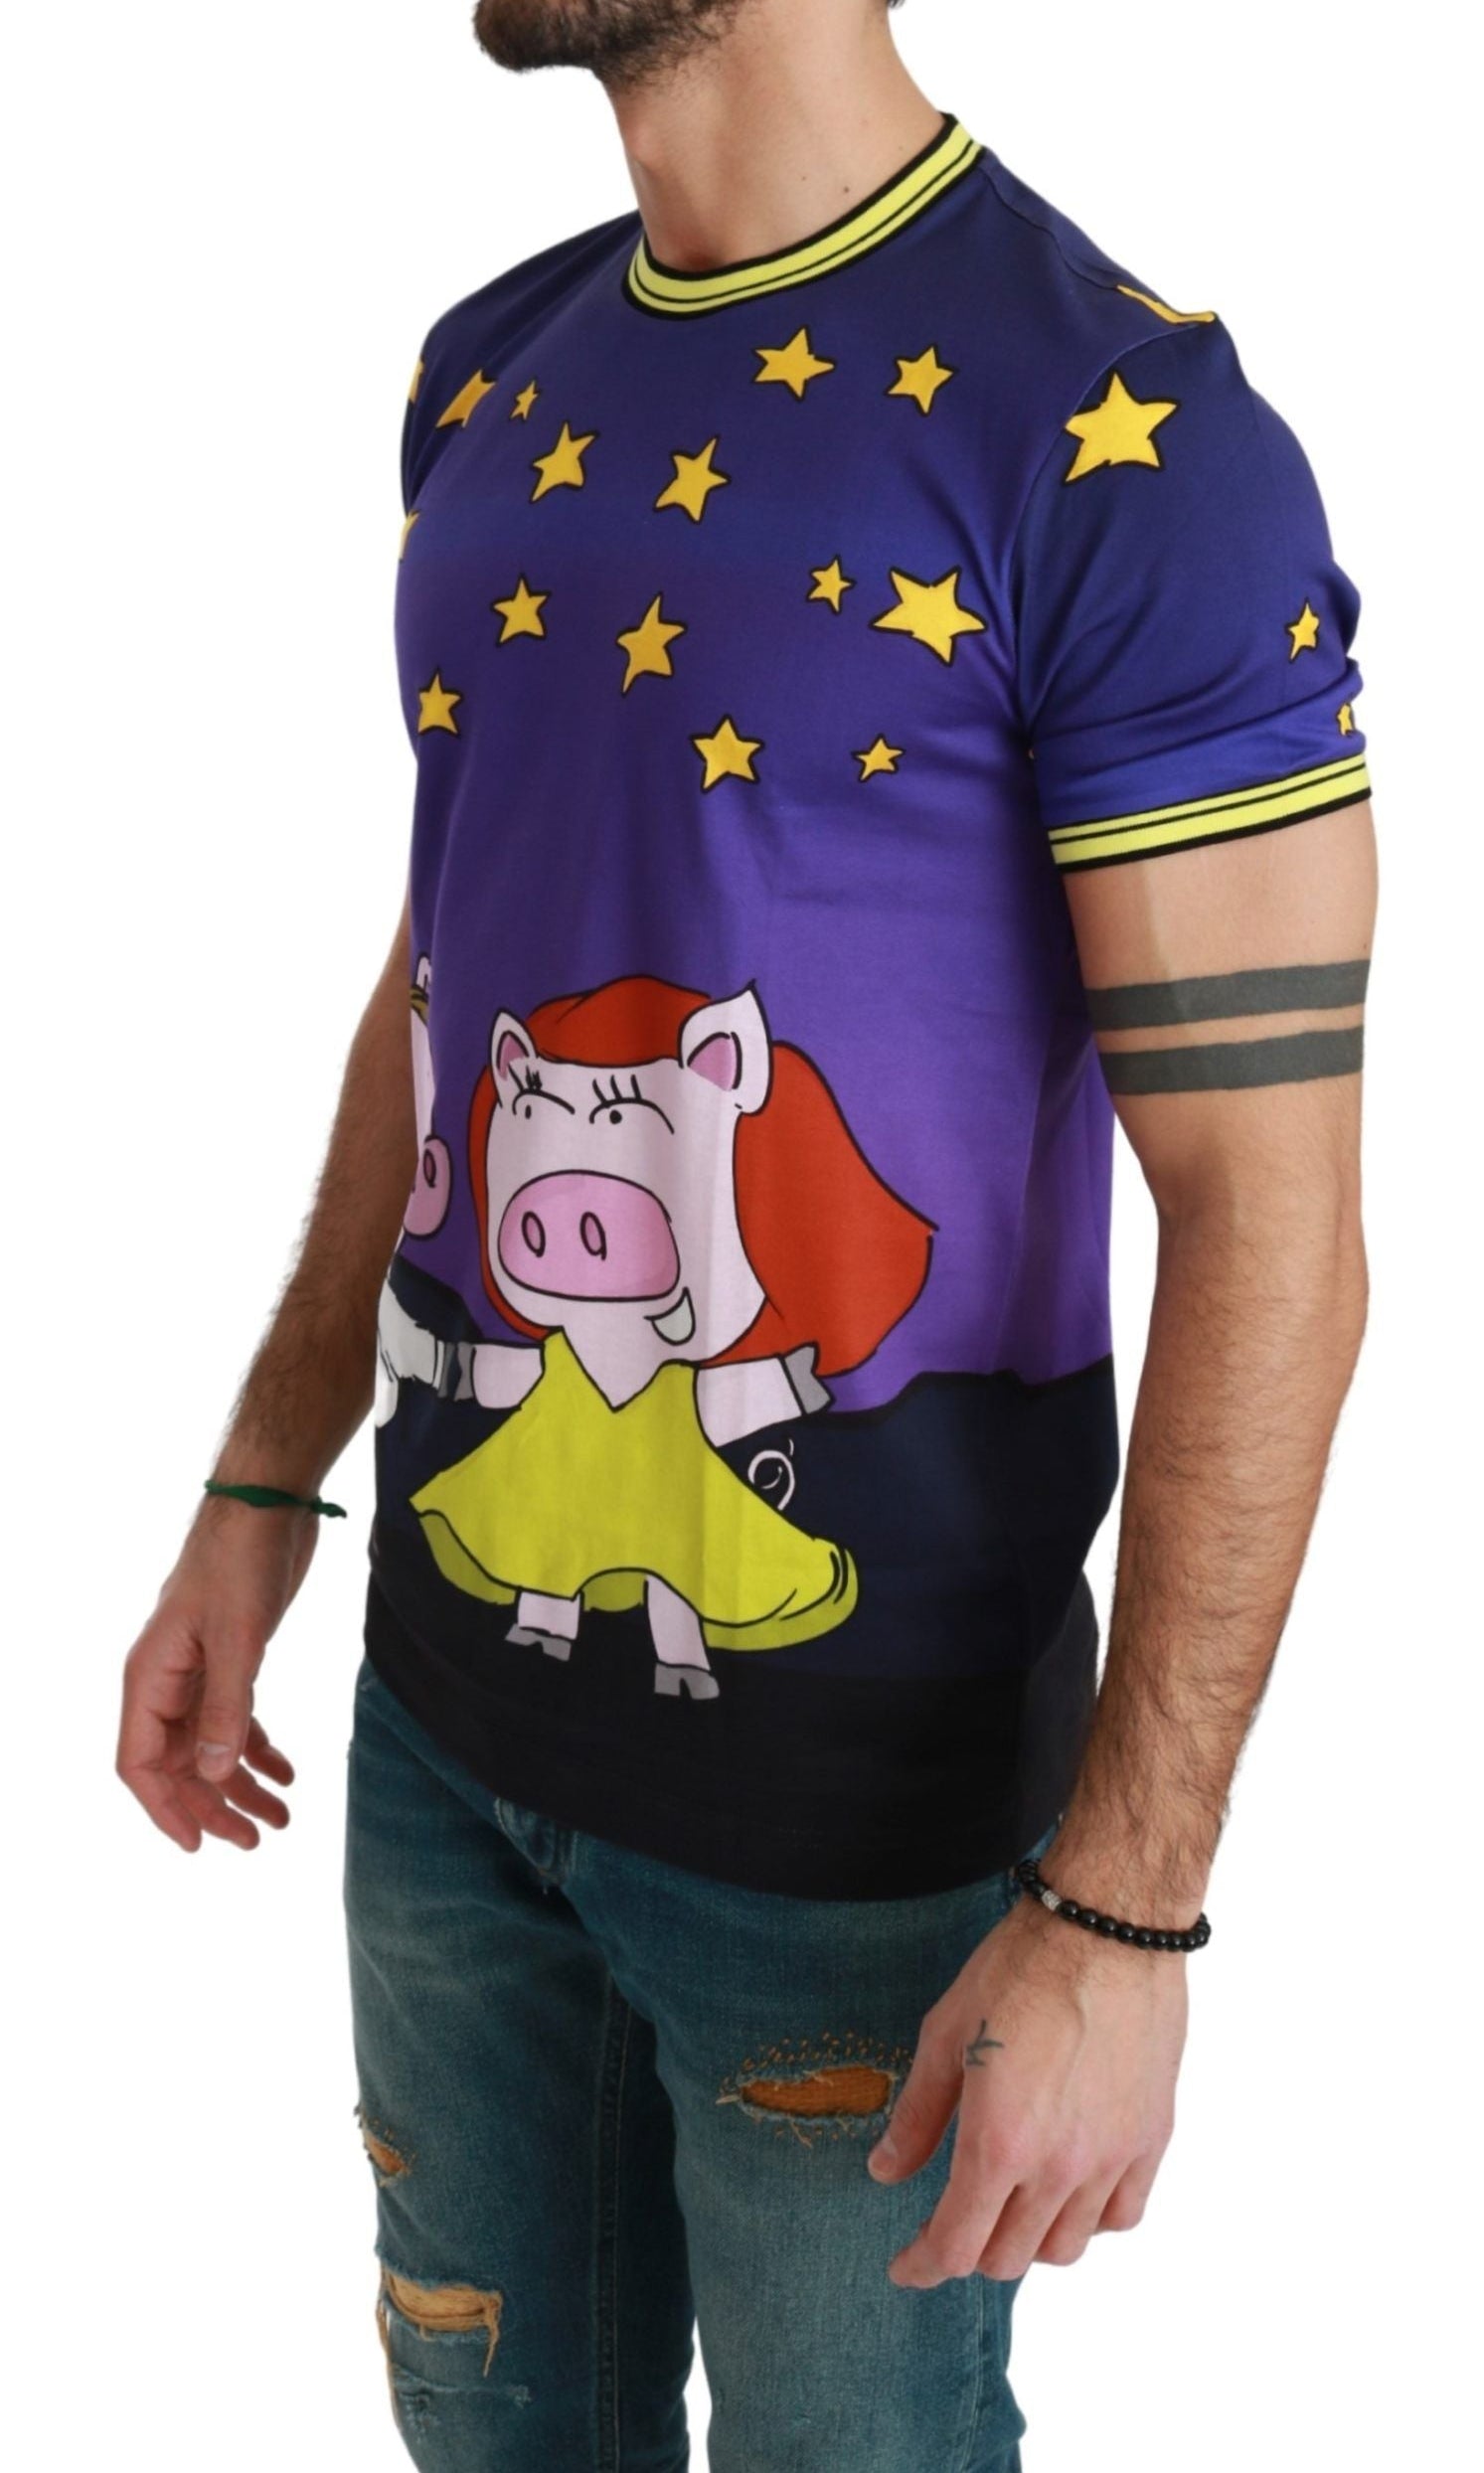 Dolce & Gabbana Purple  Cotton Top 2019 Year of the Pig  T-shirt GENUINE AUTHENTIC BRAND LLC